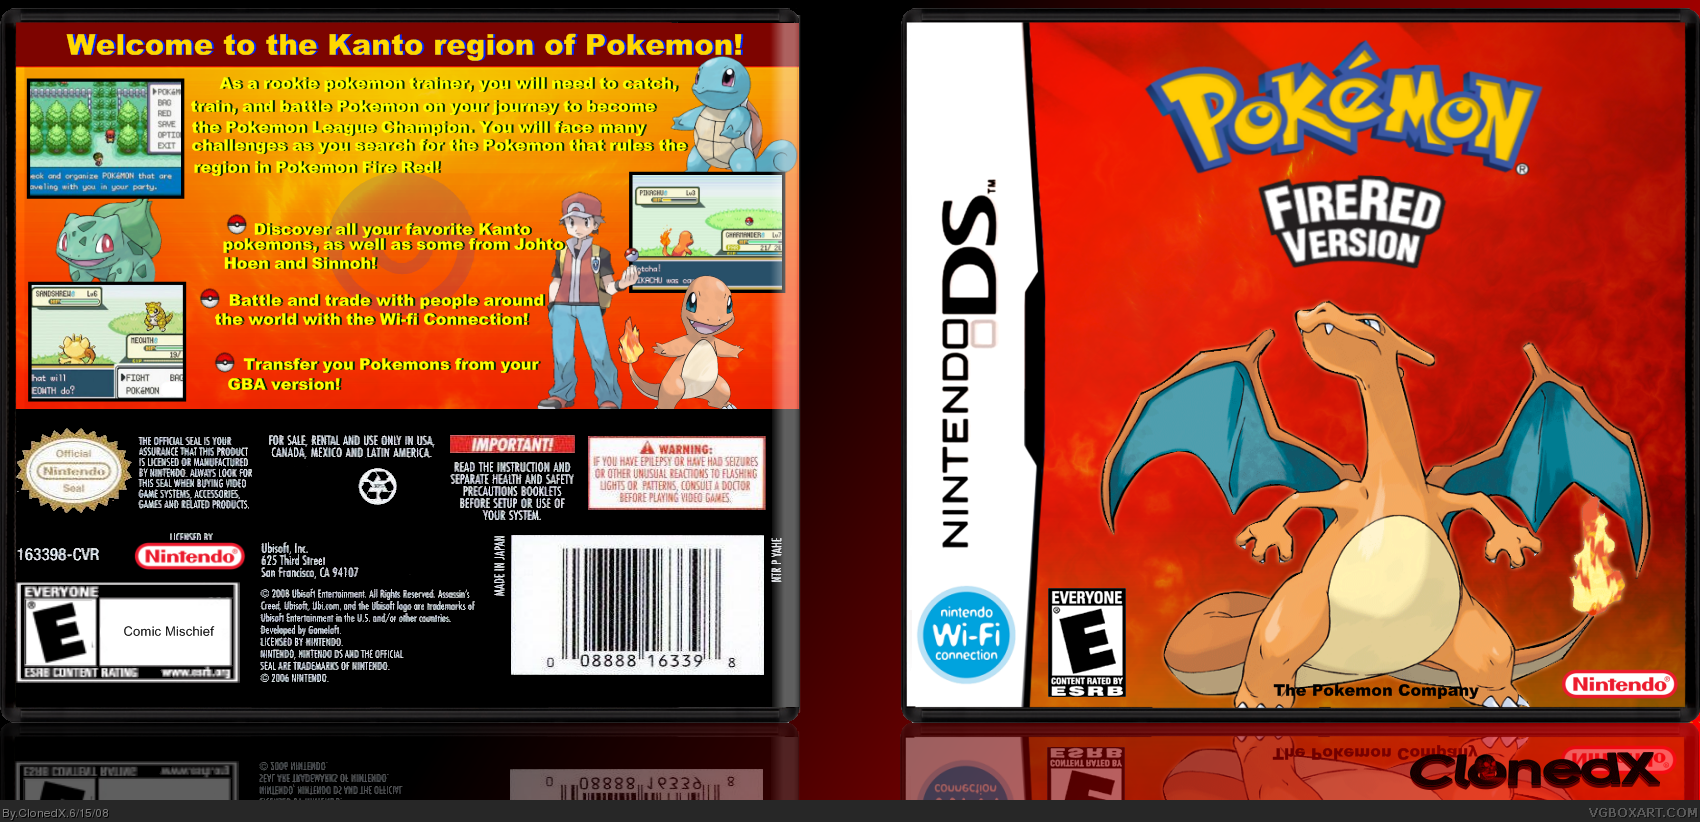 Pokemon Fire Red Nintendo DS Box Art Cover by ClonedX